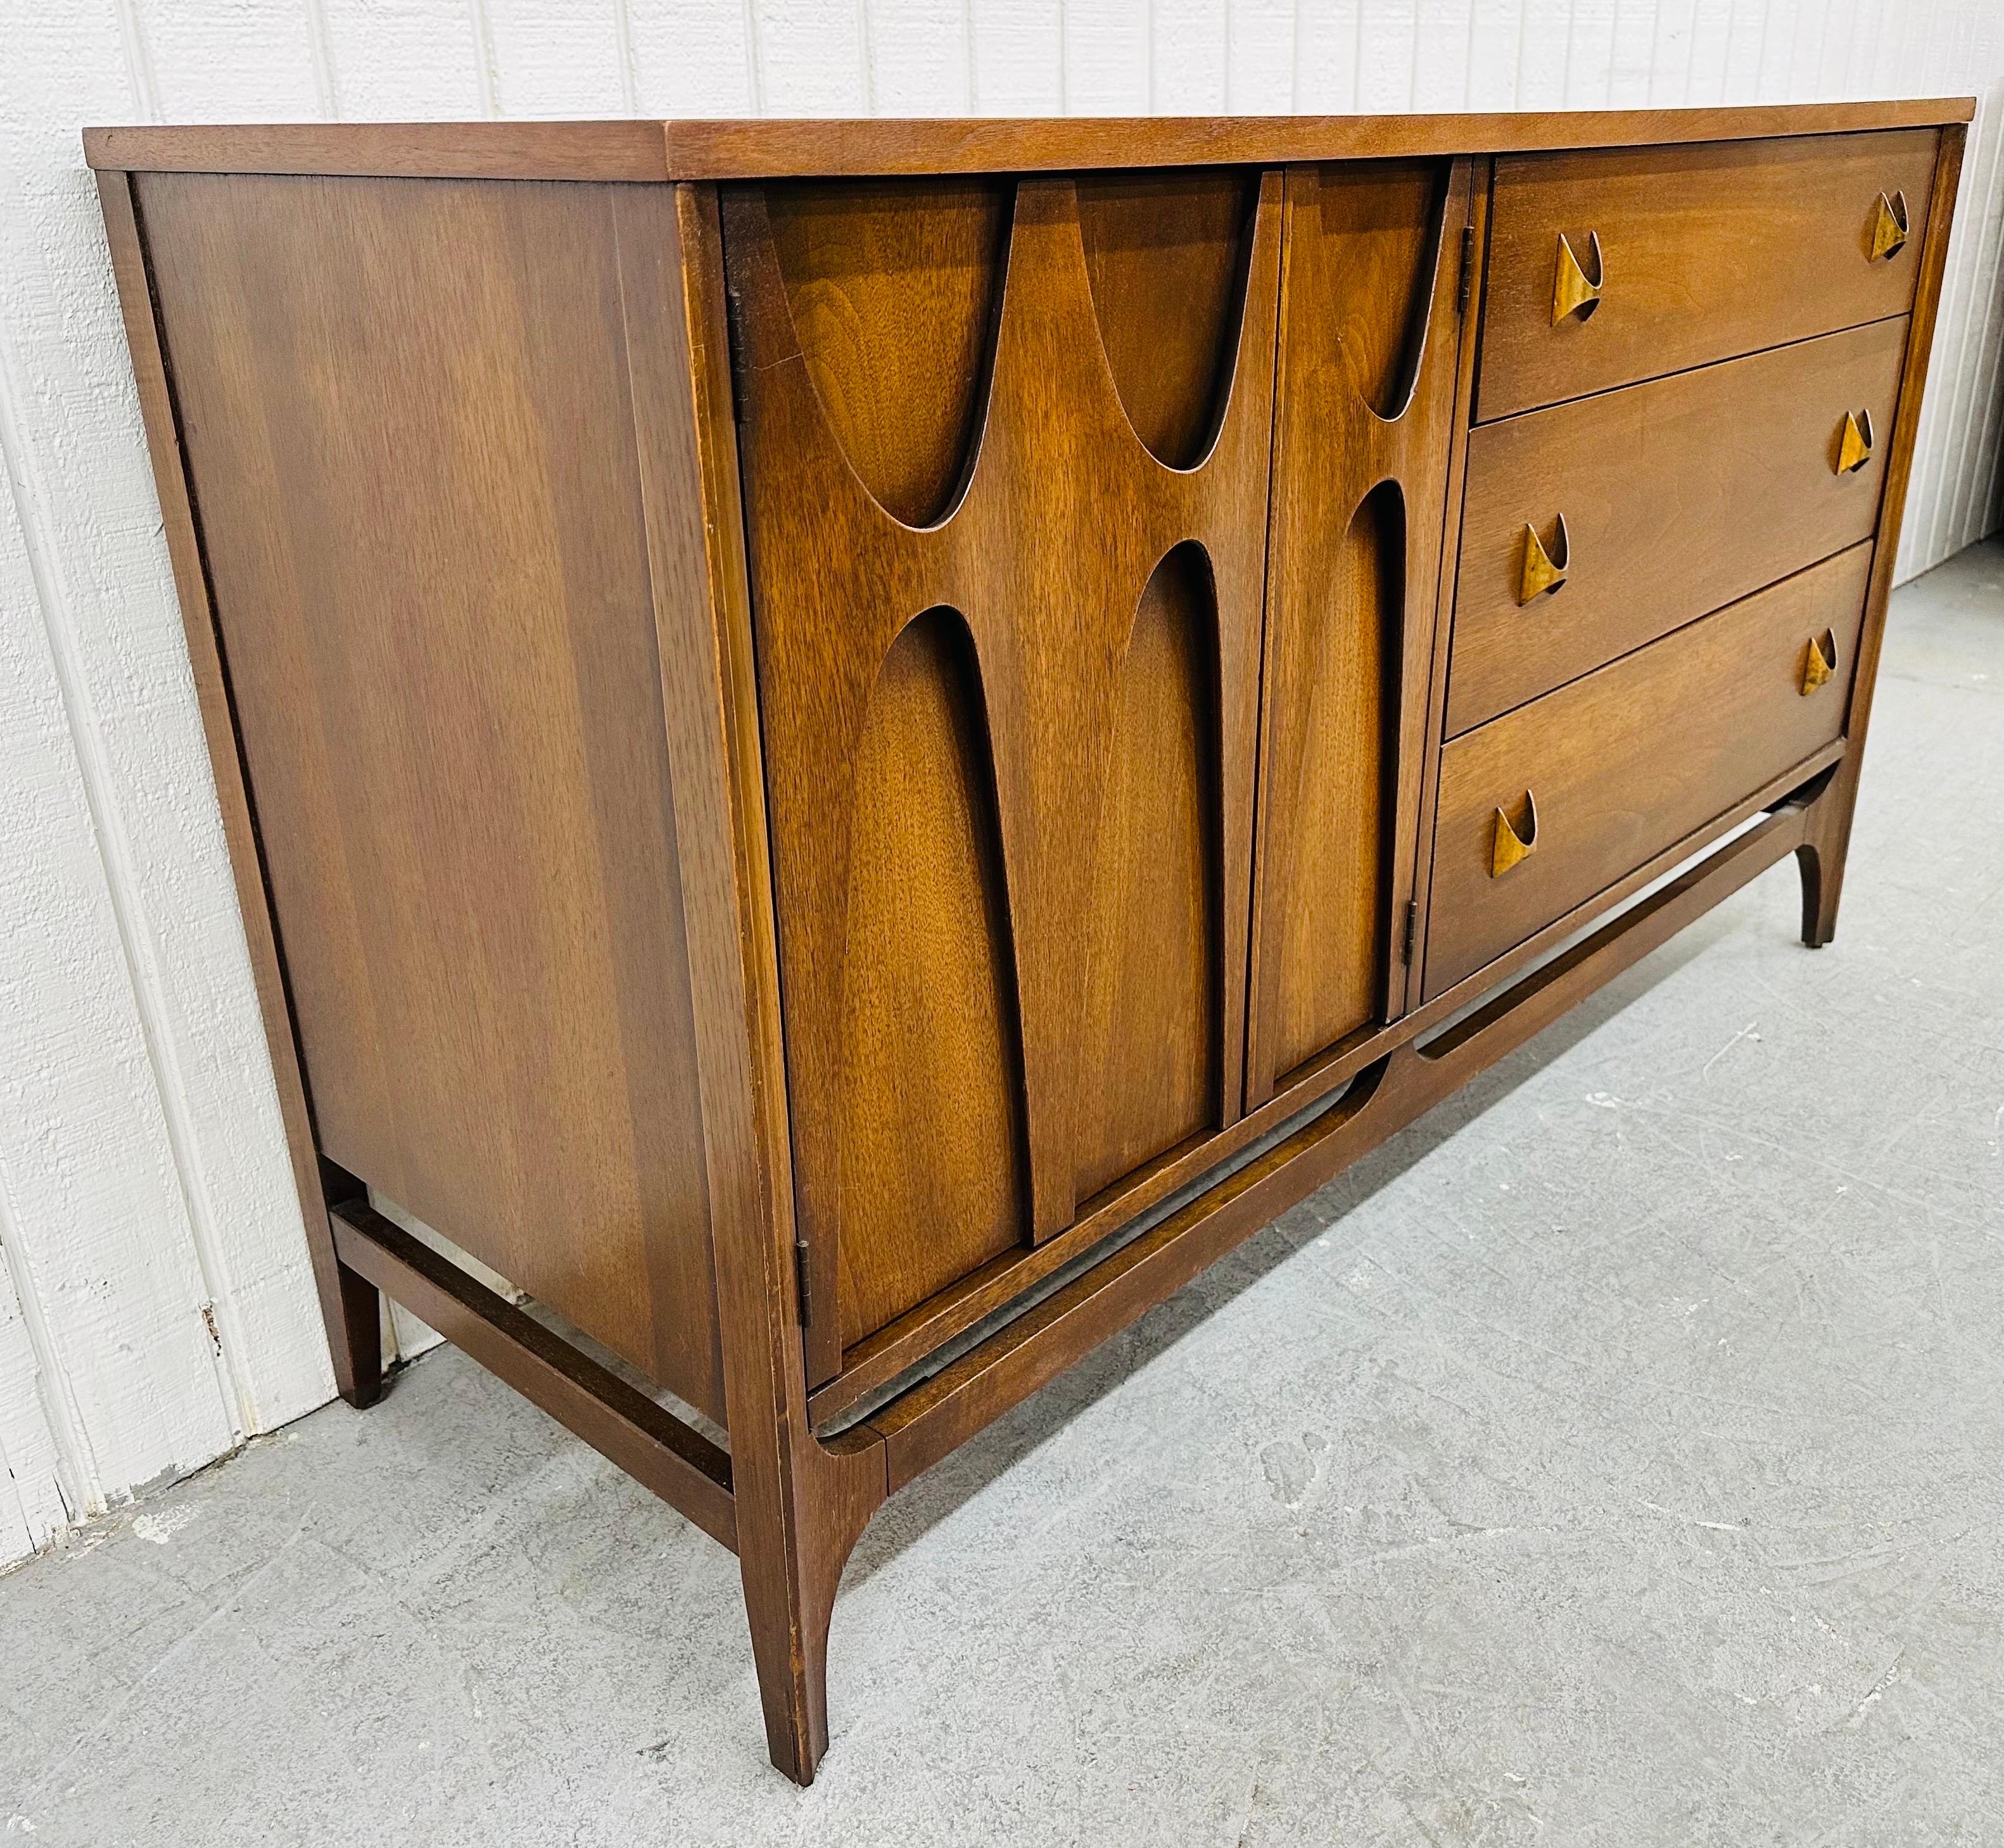 This listing is for a Mid-Century Modern Broyhill Brasilia Walnut Server. Featuring a straight line design, sculpted doors on the left that open up to storage space, three drawers on the right, original brass Brasilia pulls, and a beautiful walnut